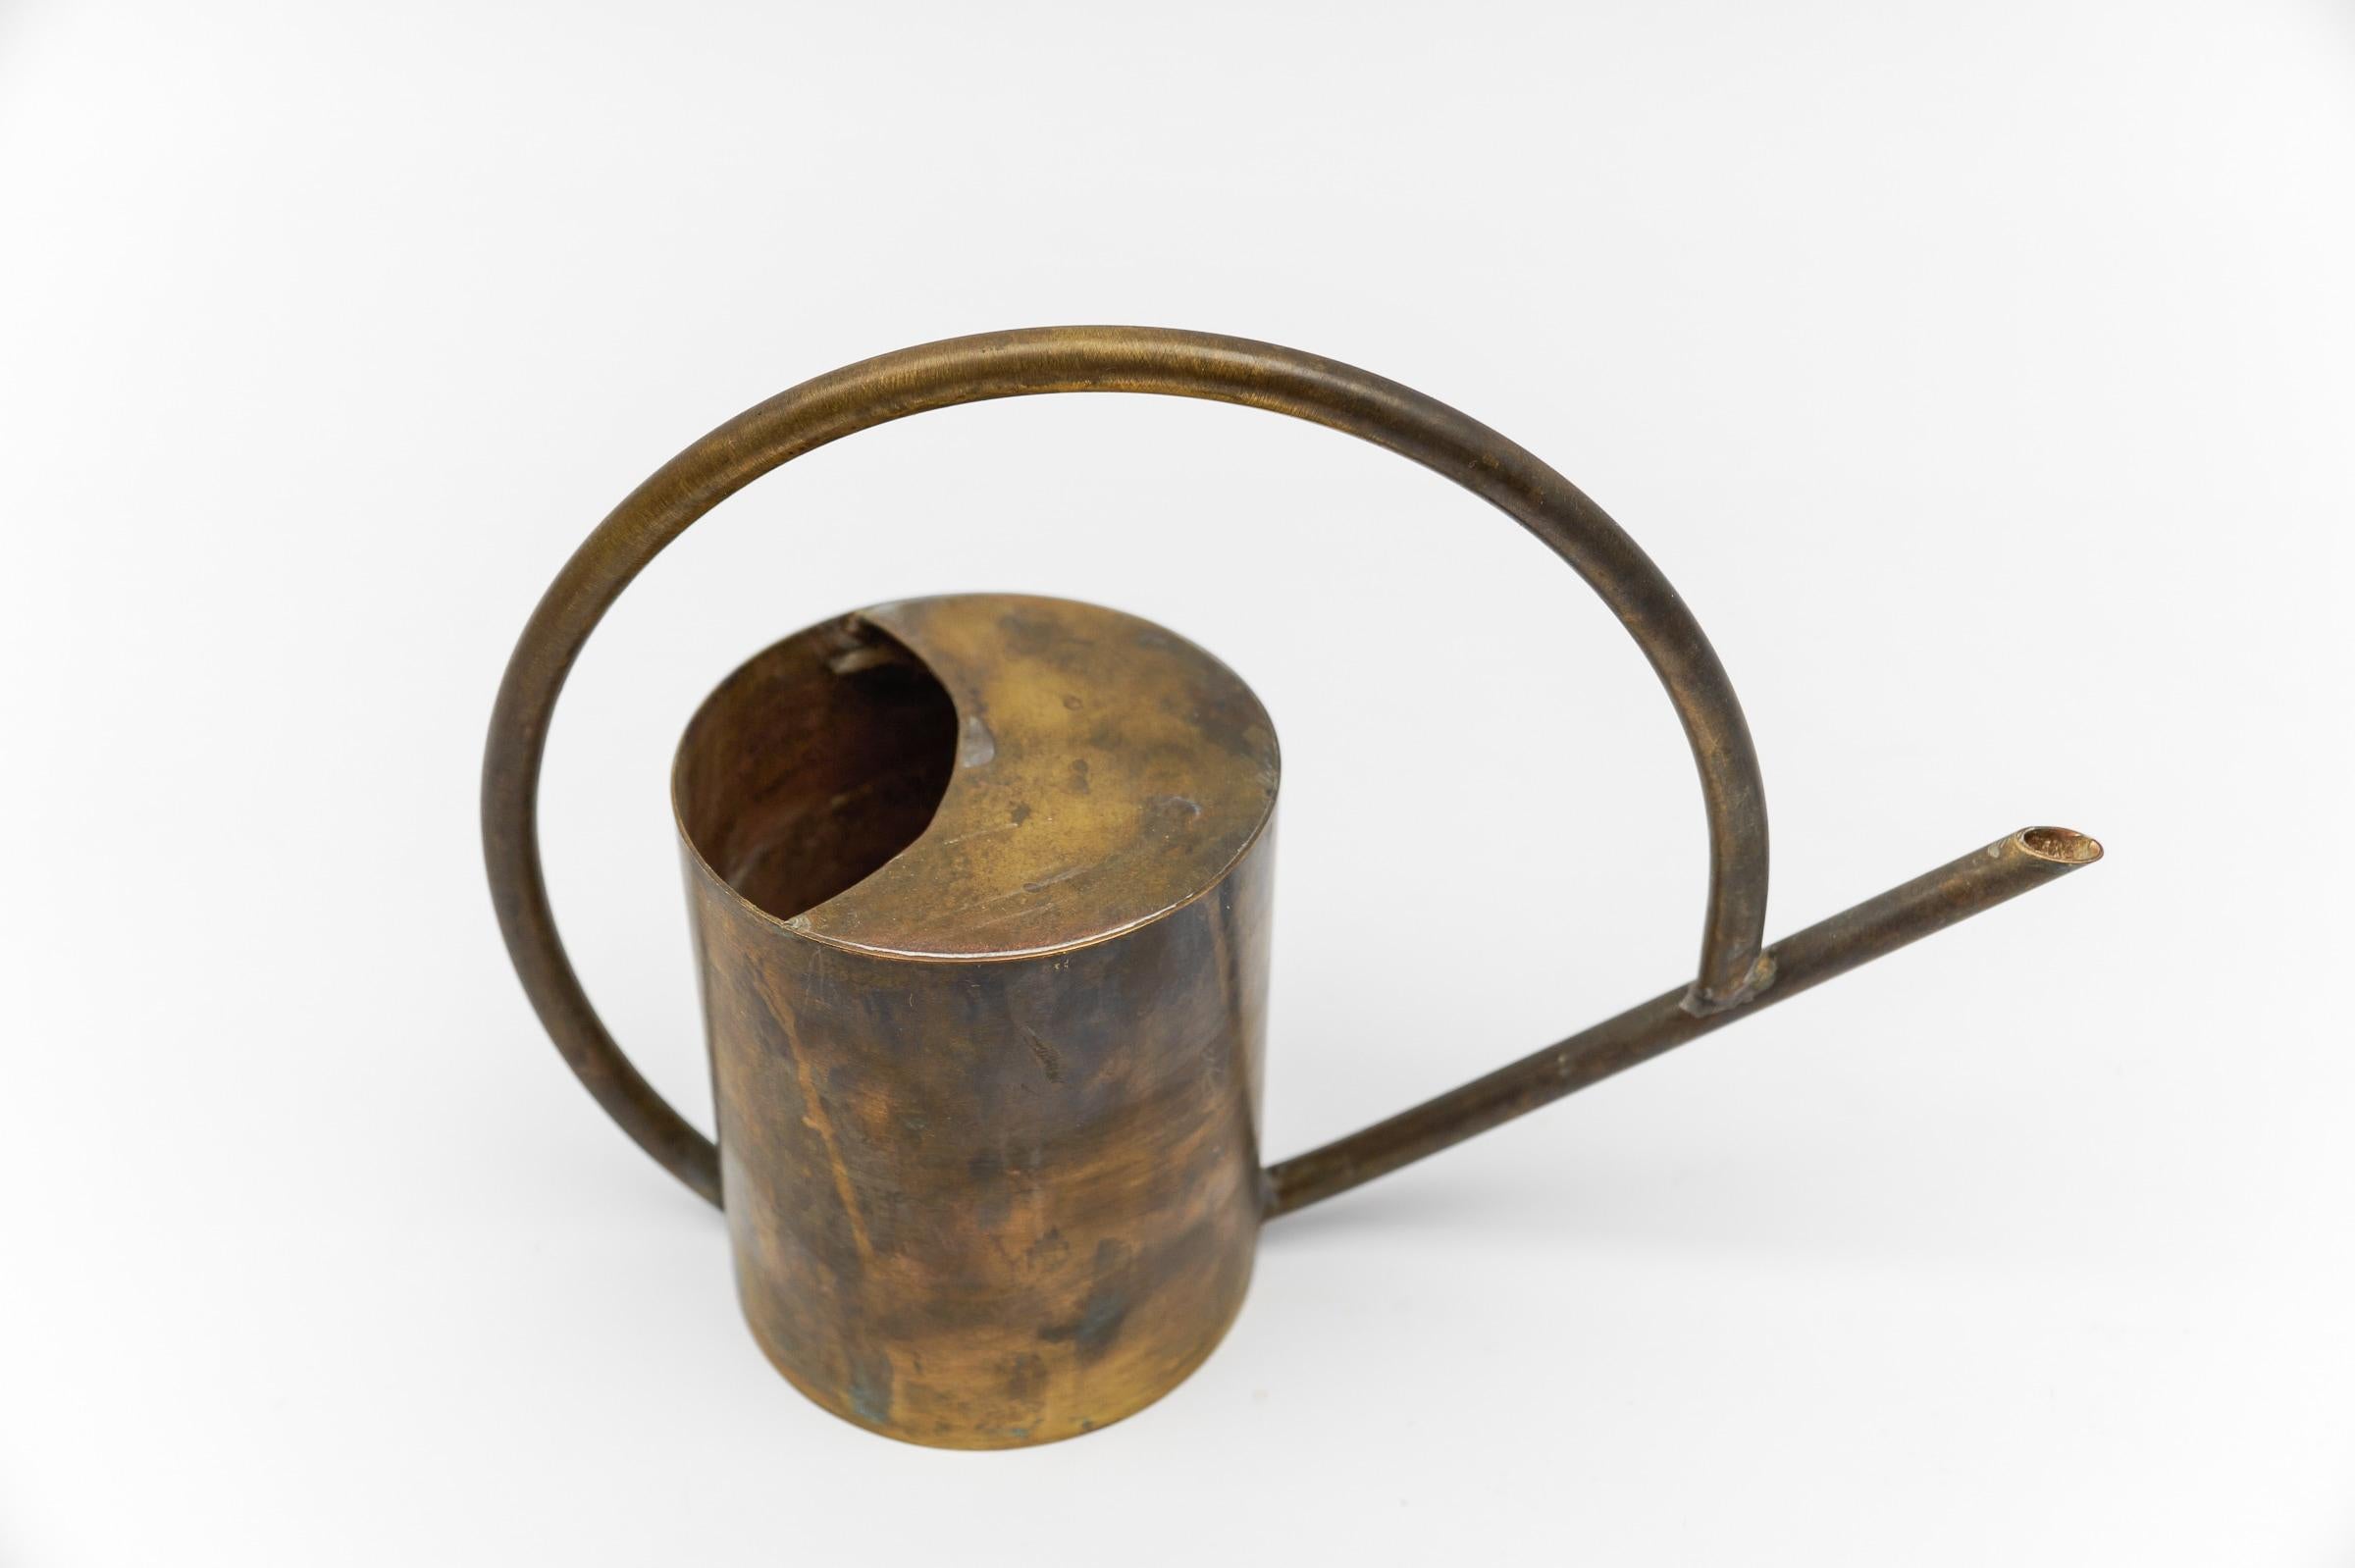 Mid-Century Modern Art Deco Bauhaus  Watering Can in Massive Brass, 1930s / 1940s Germany For Sale